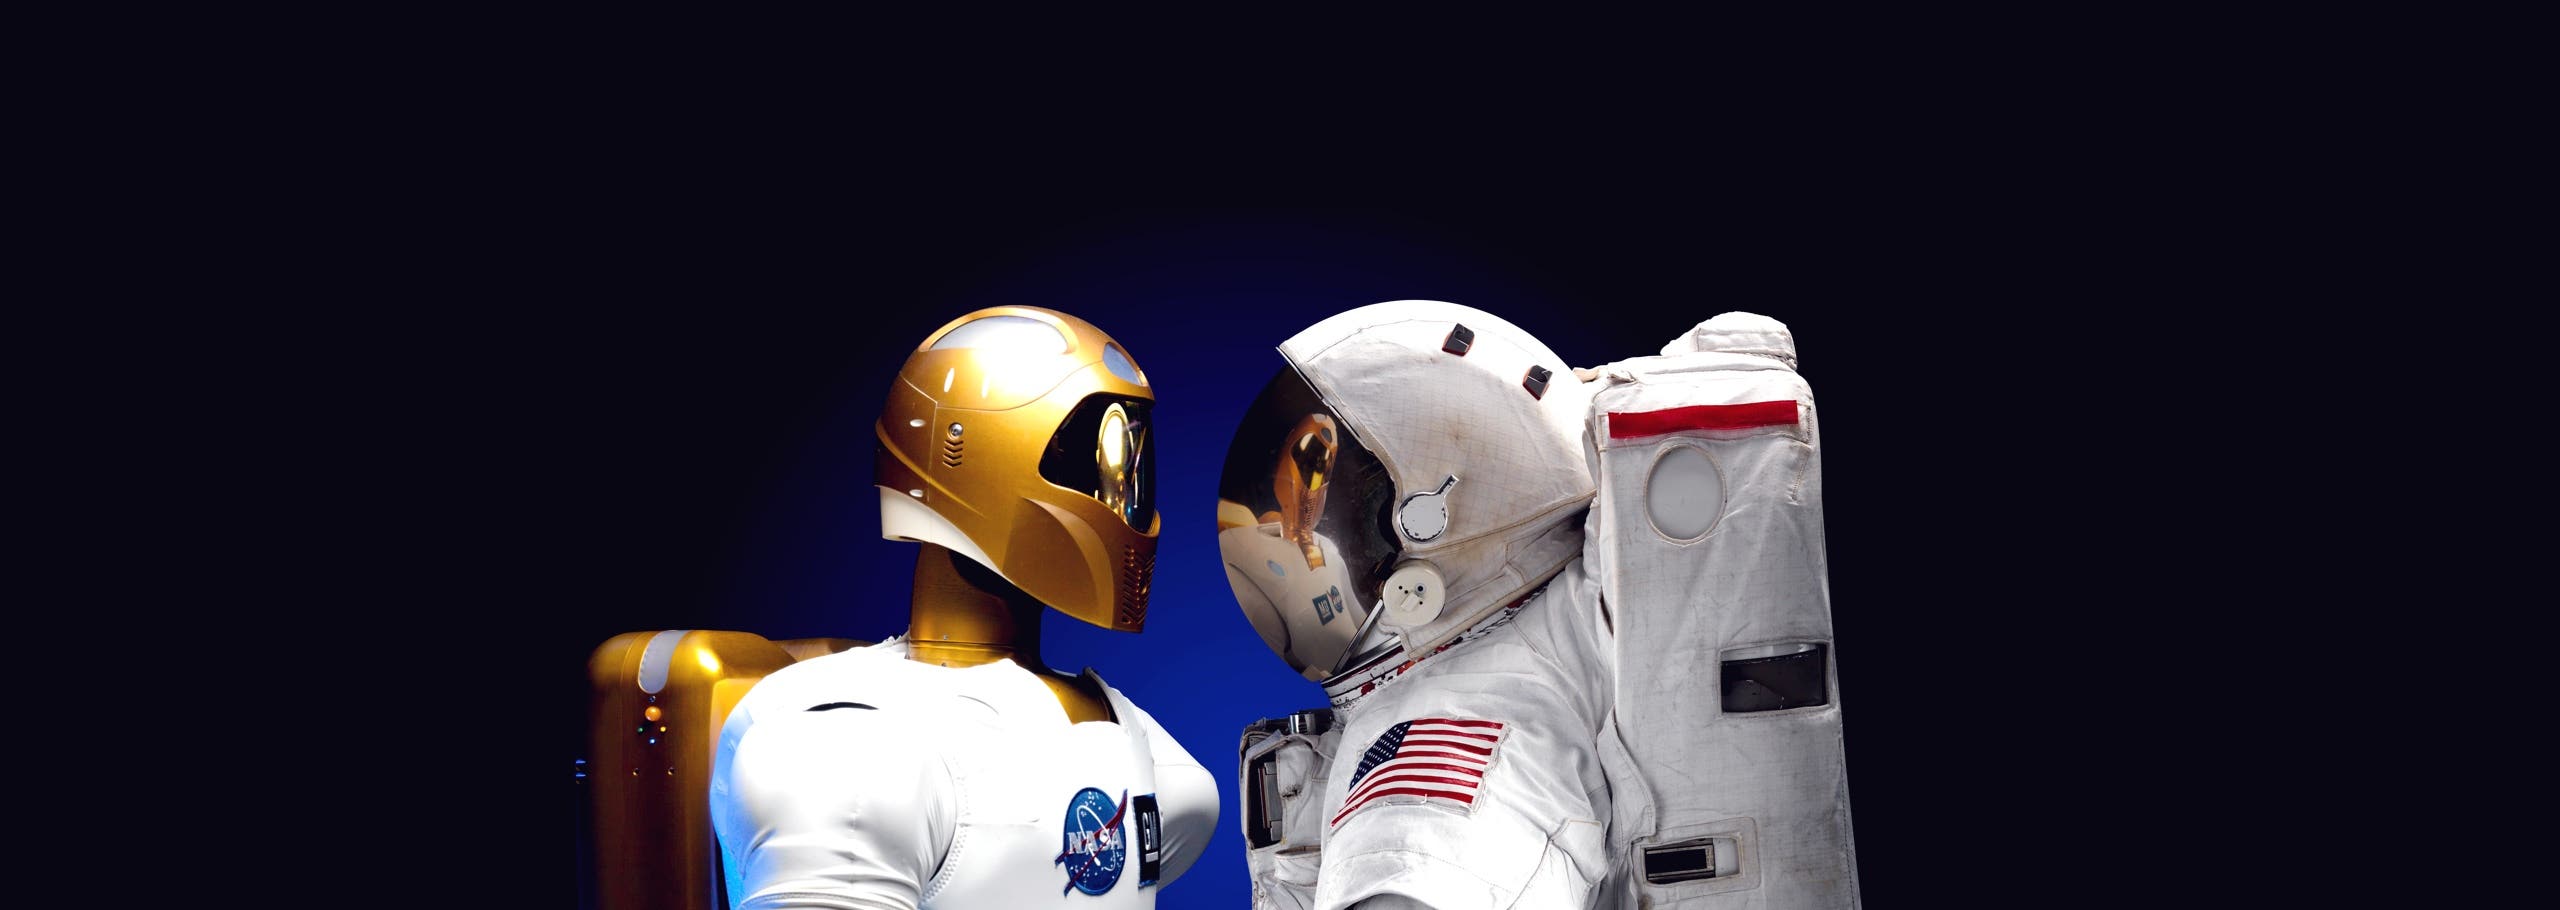 Robonaut and astronaut facing each other background image